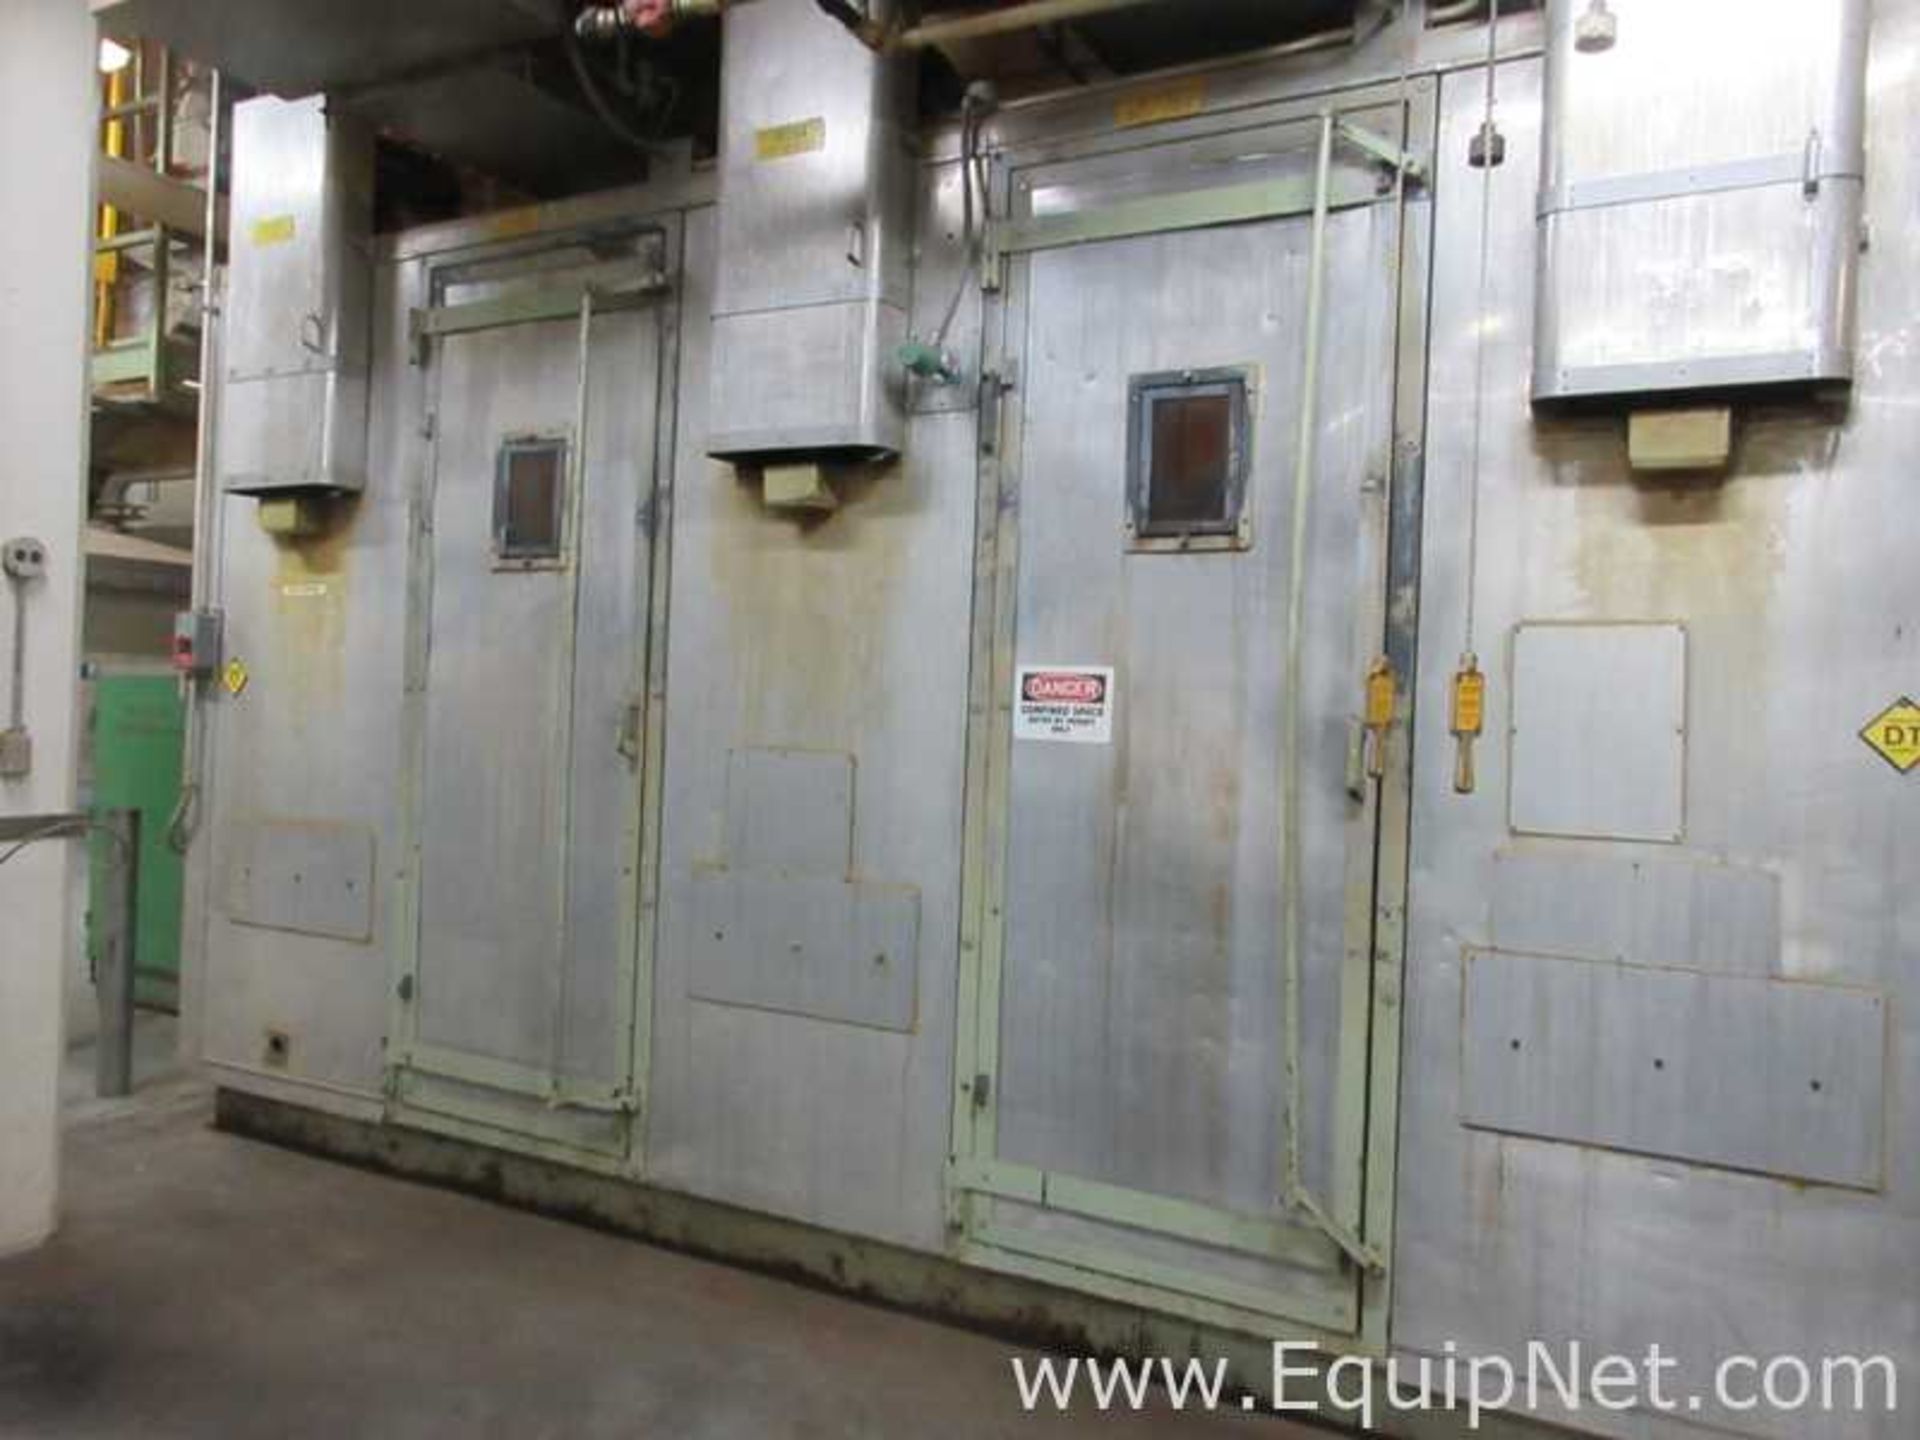 EQUIPNET LISTING #597061; REMOVAL COST: $0; DESCRIPTION: National Drying Machinery Belt - Image 2 of 27